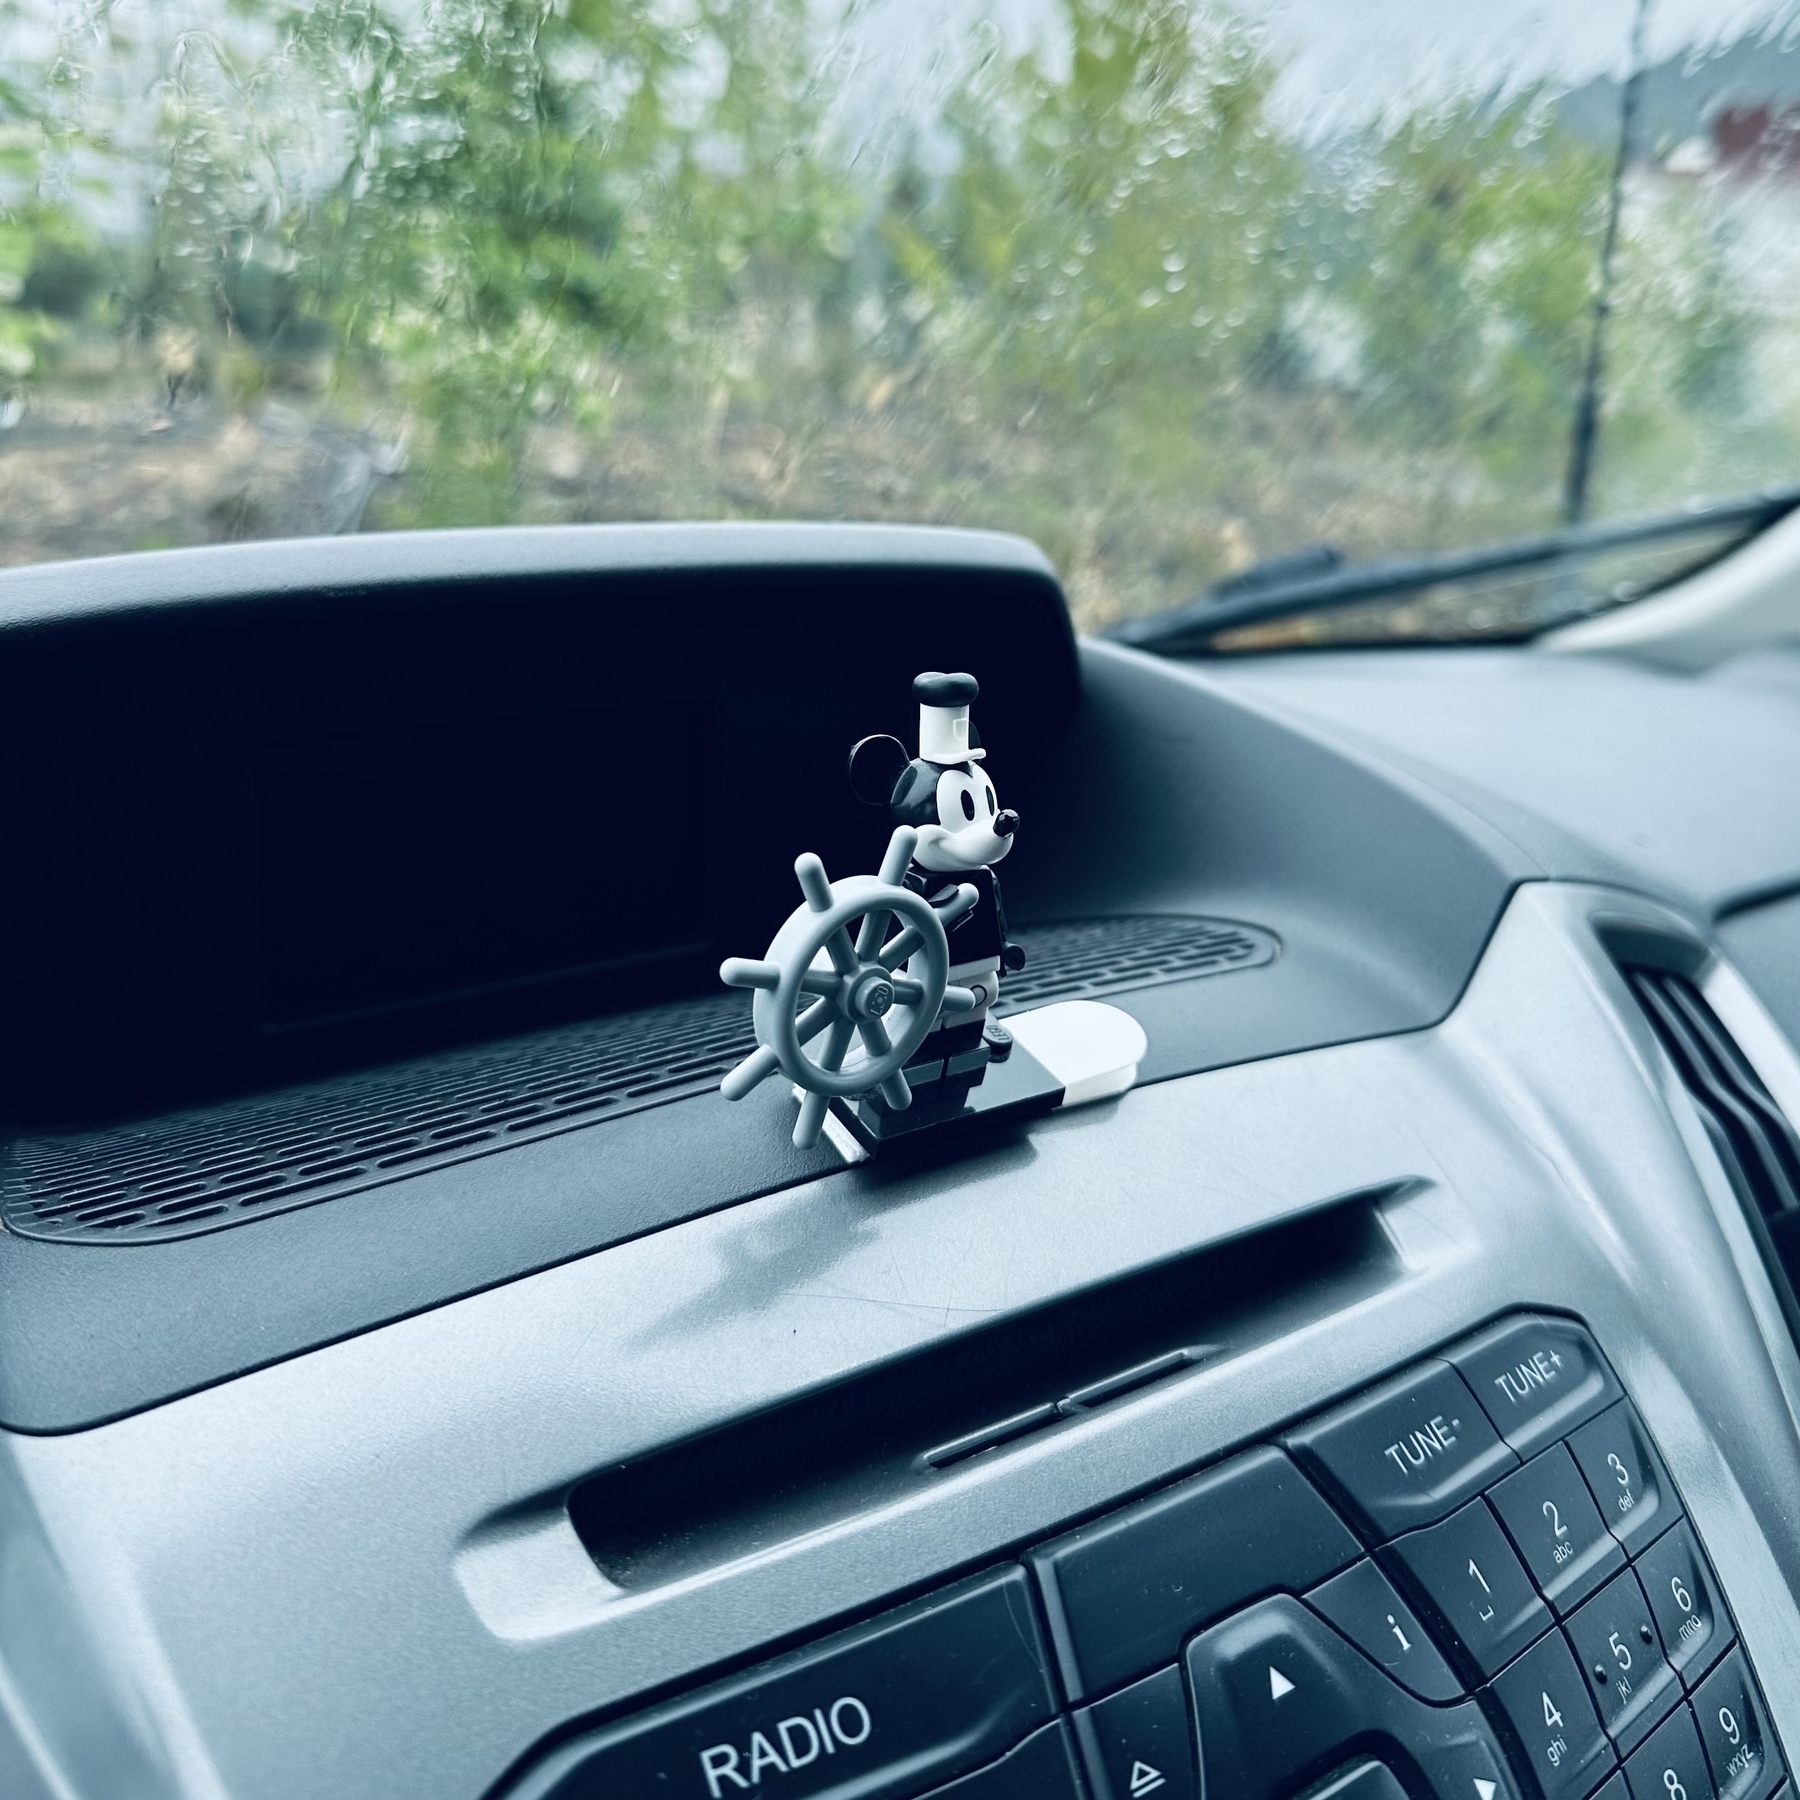 LEGO Mickey Mouse attached to van dashboard.